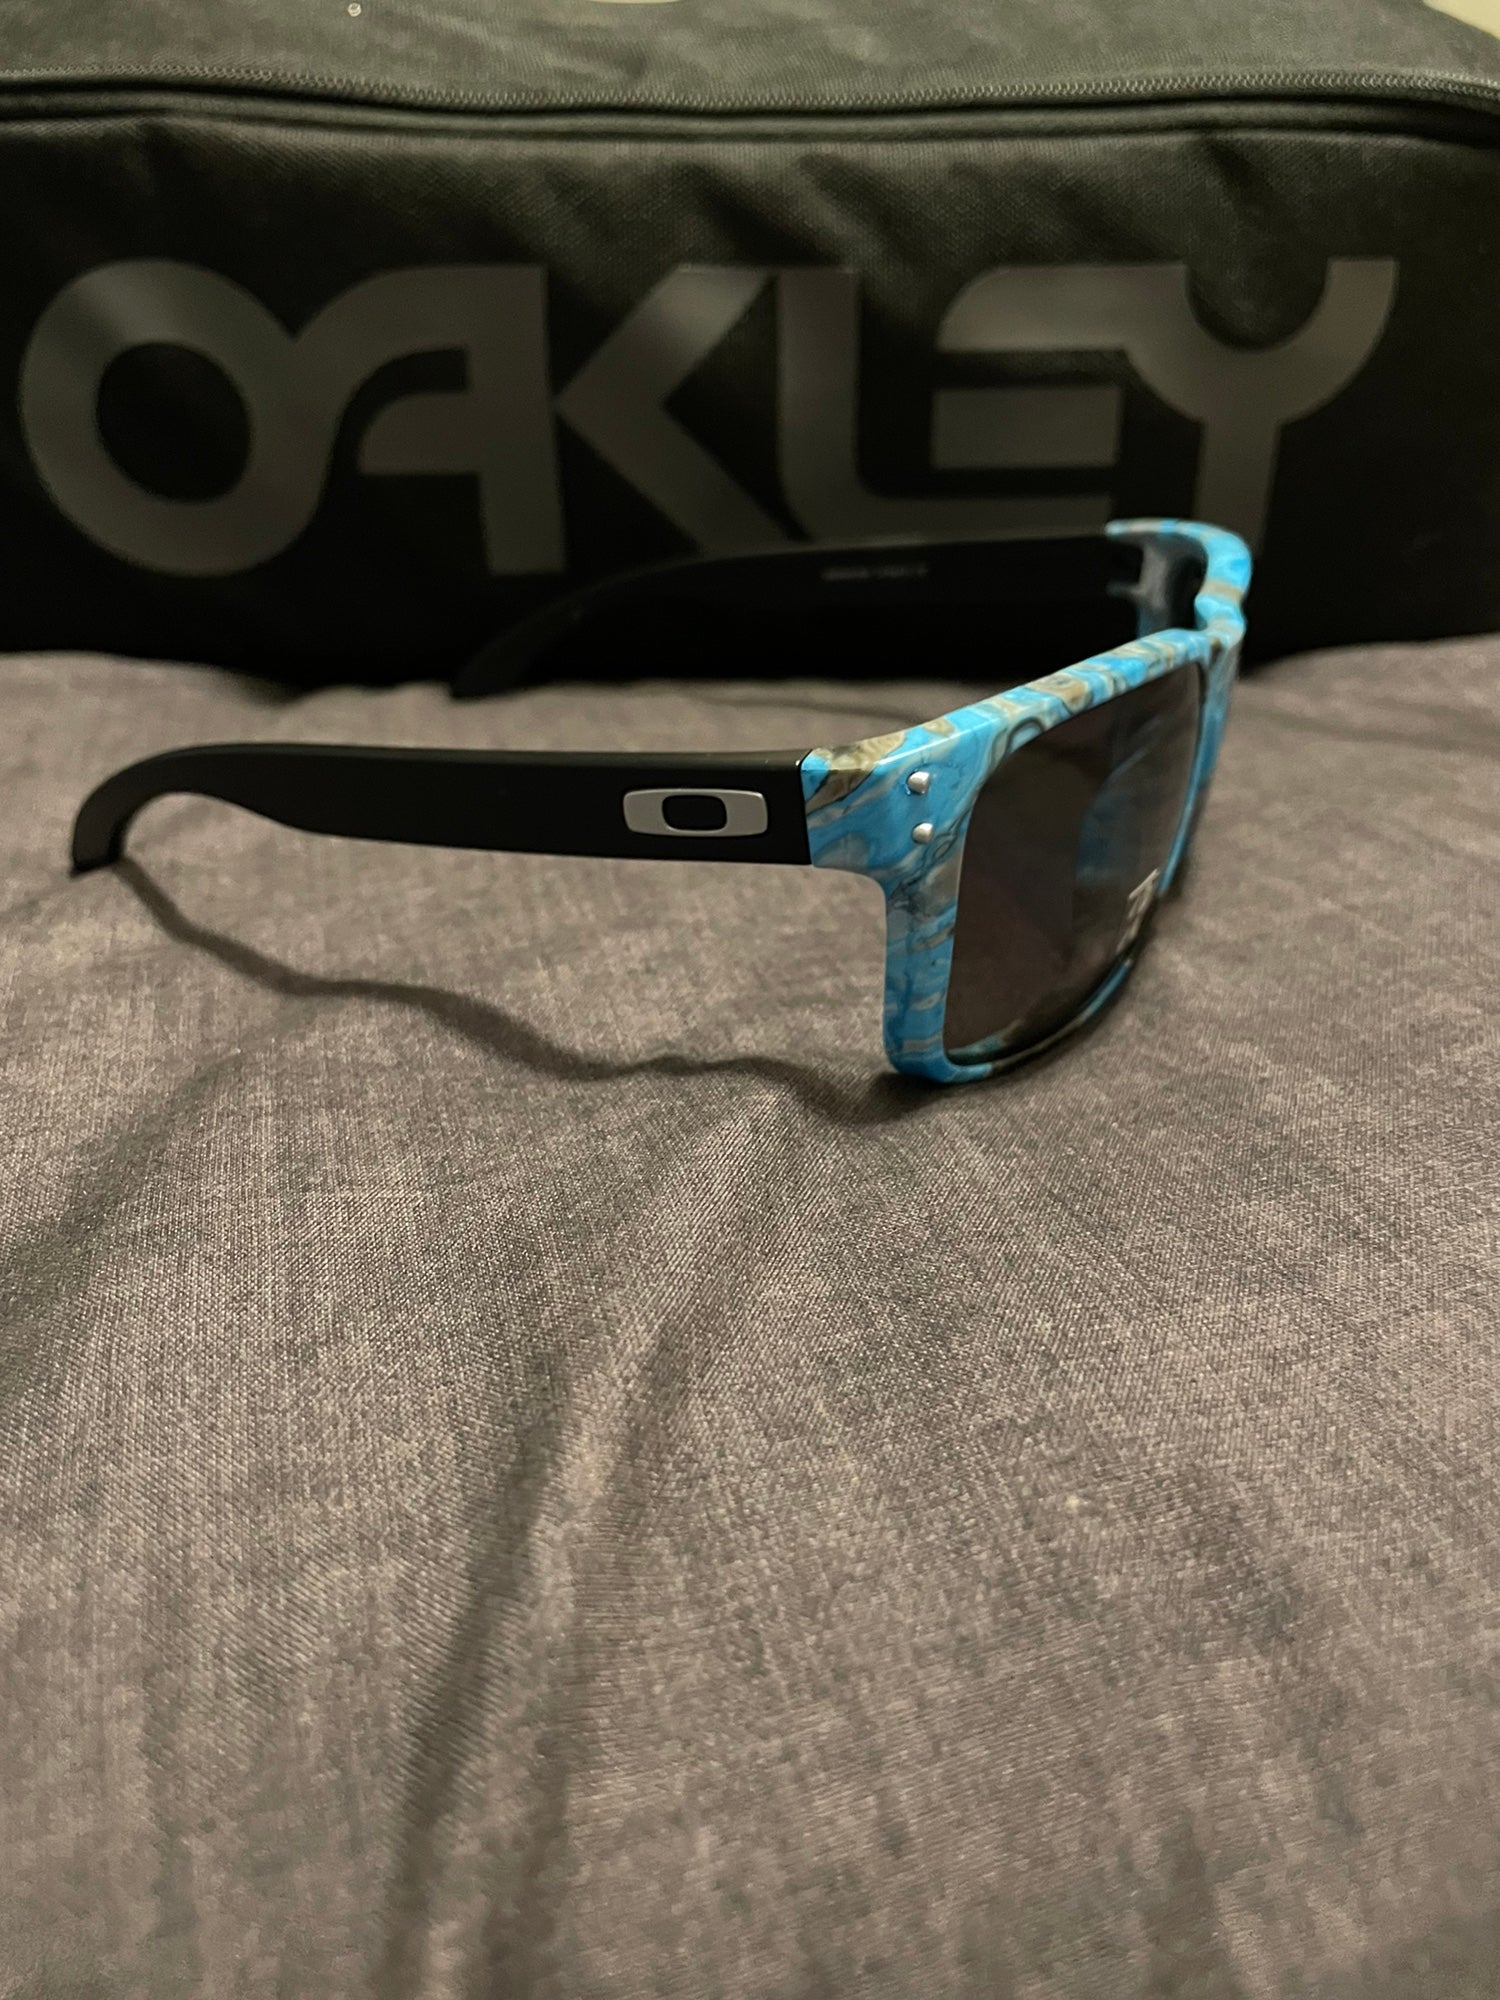 Oakley Holbrook Sanctuary Collection | SidelineSwap